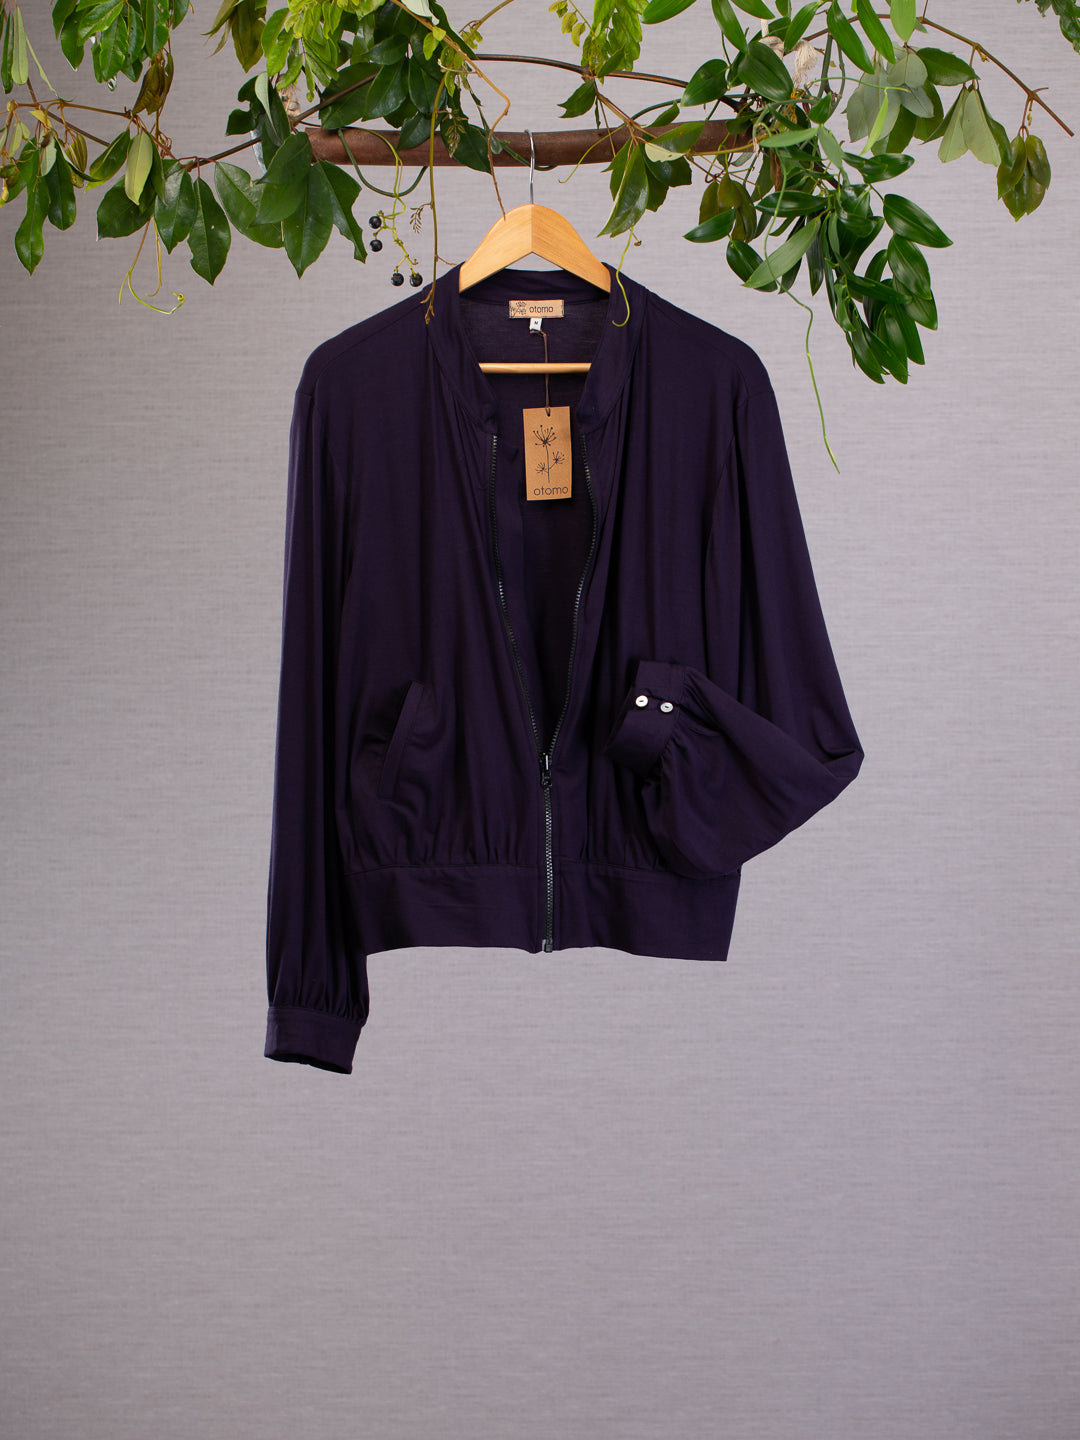 Charcoal bomber jacket hanging on vines displaying the cuff with small shell buttons.